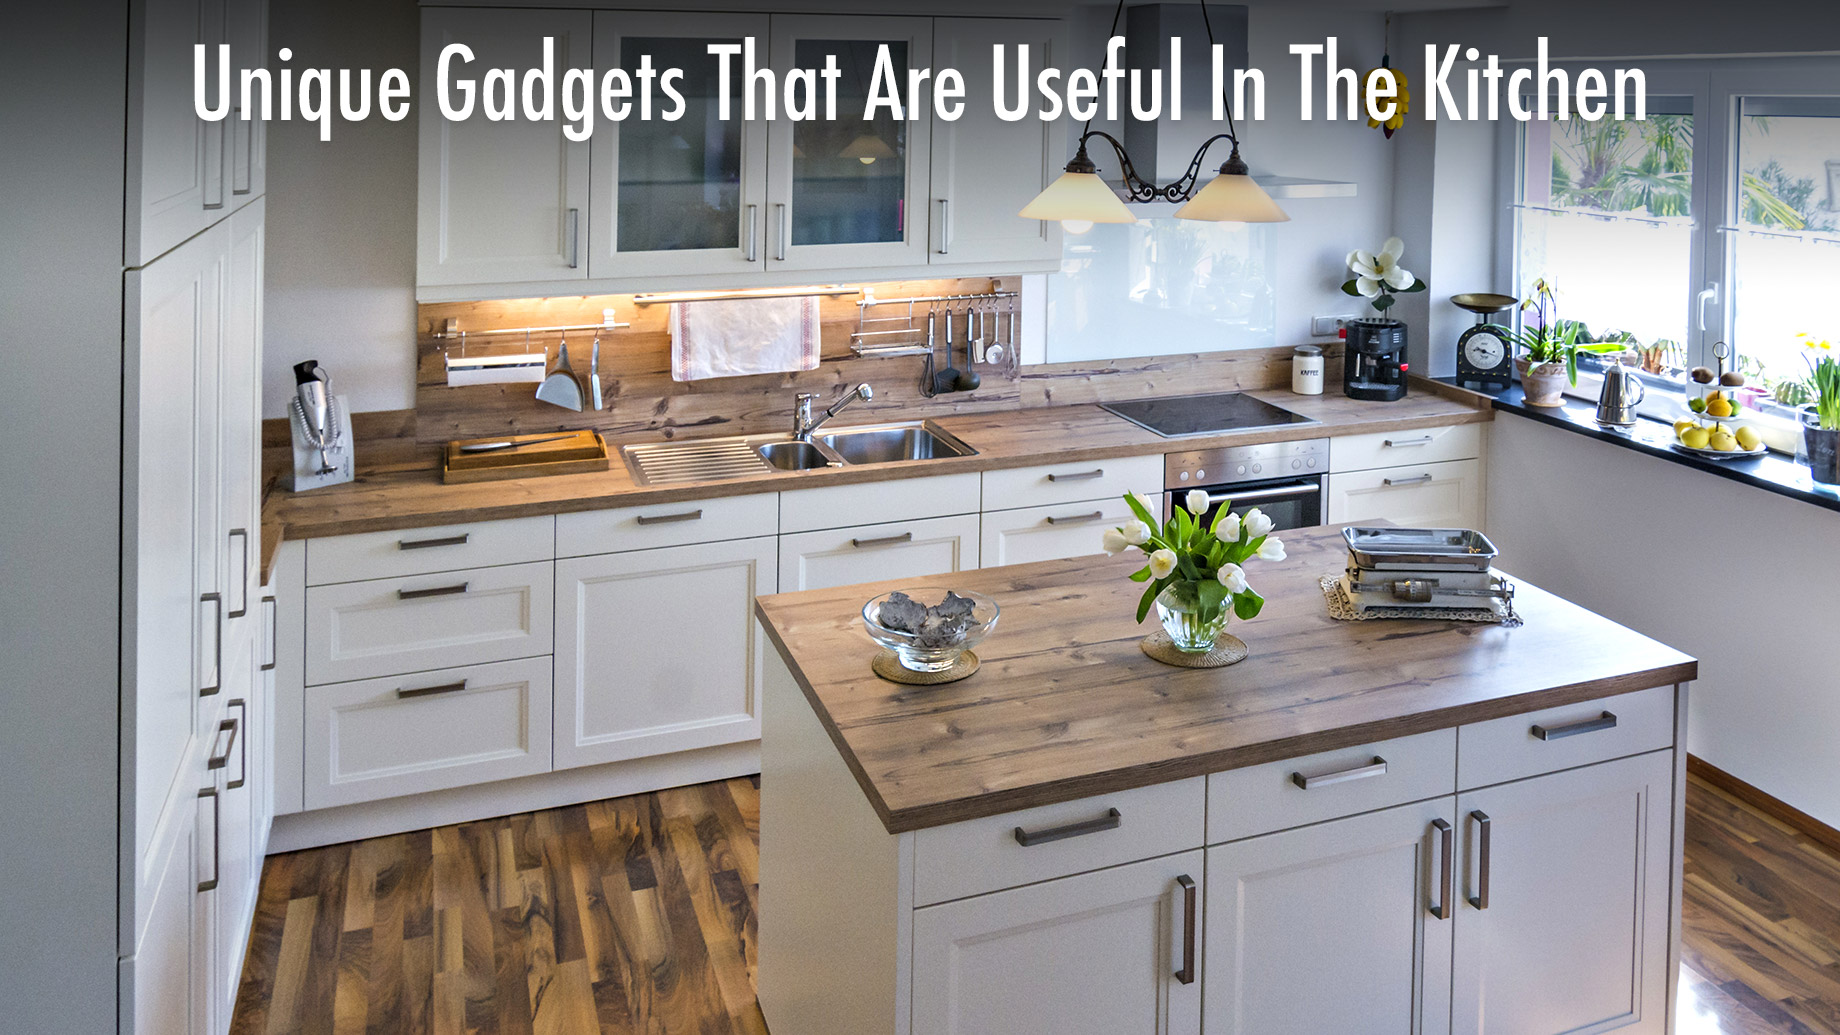 Home Essentials - Unique Gadgets That Are Useful In The Kitchen